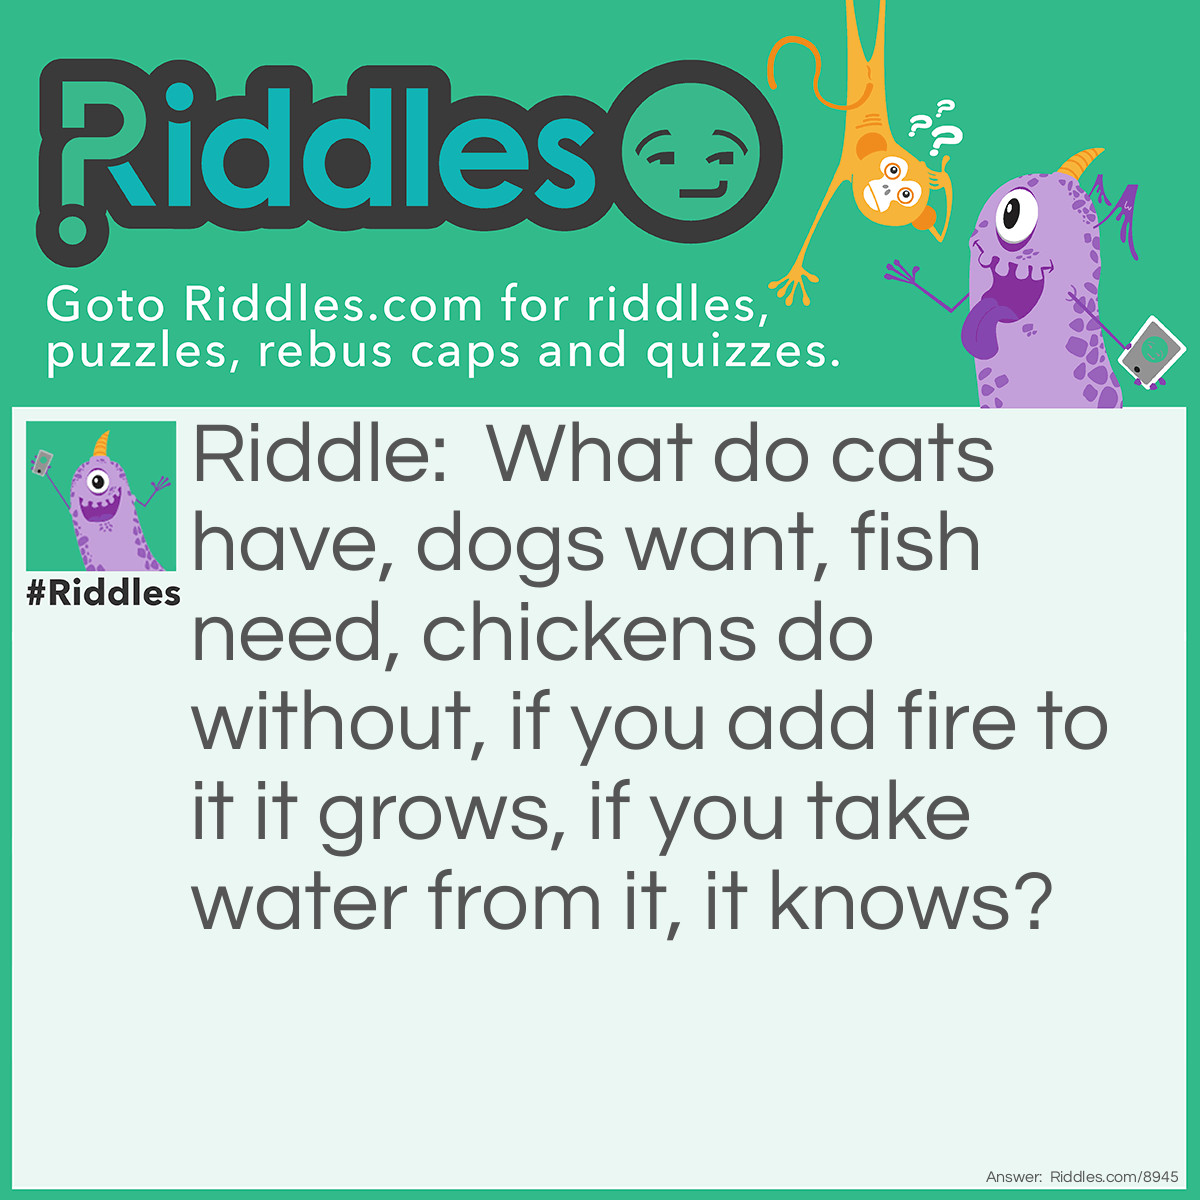 Riddle: What do cats have, dogs want, fish need, chickens do without, if you add fire to it it grows, if you take water from it, it knows? Answer: night moves by bob seger